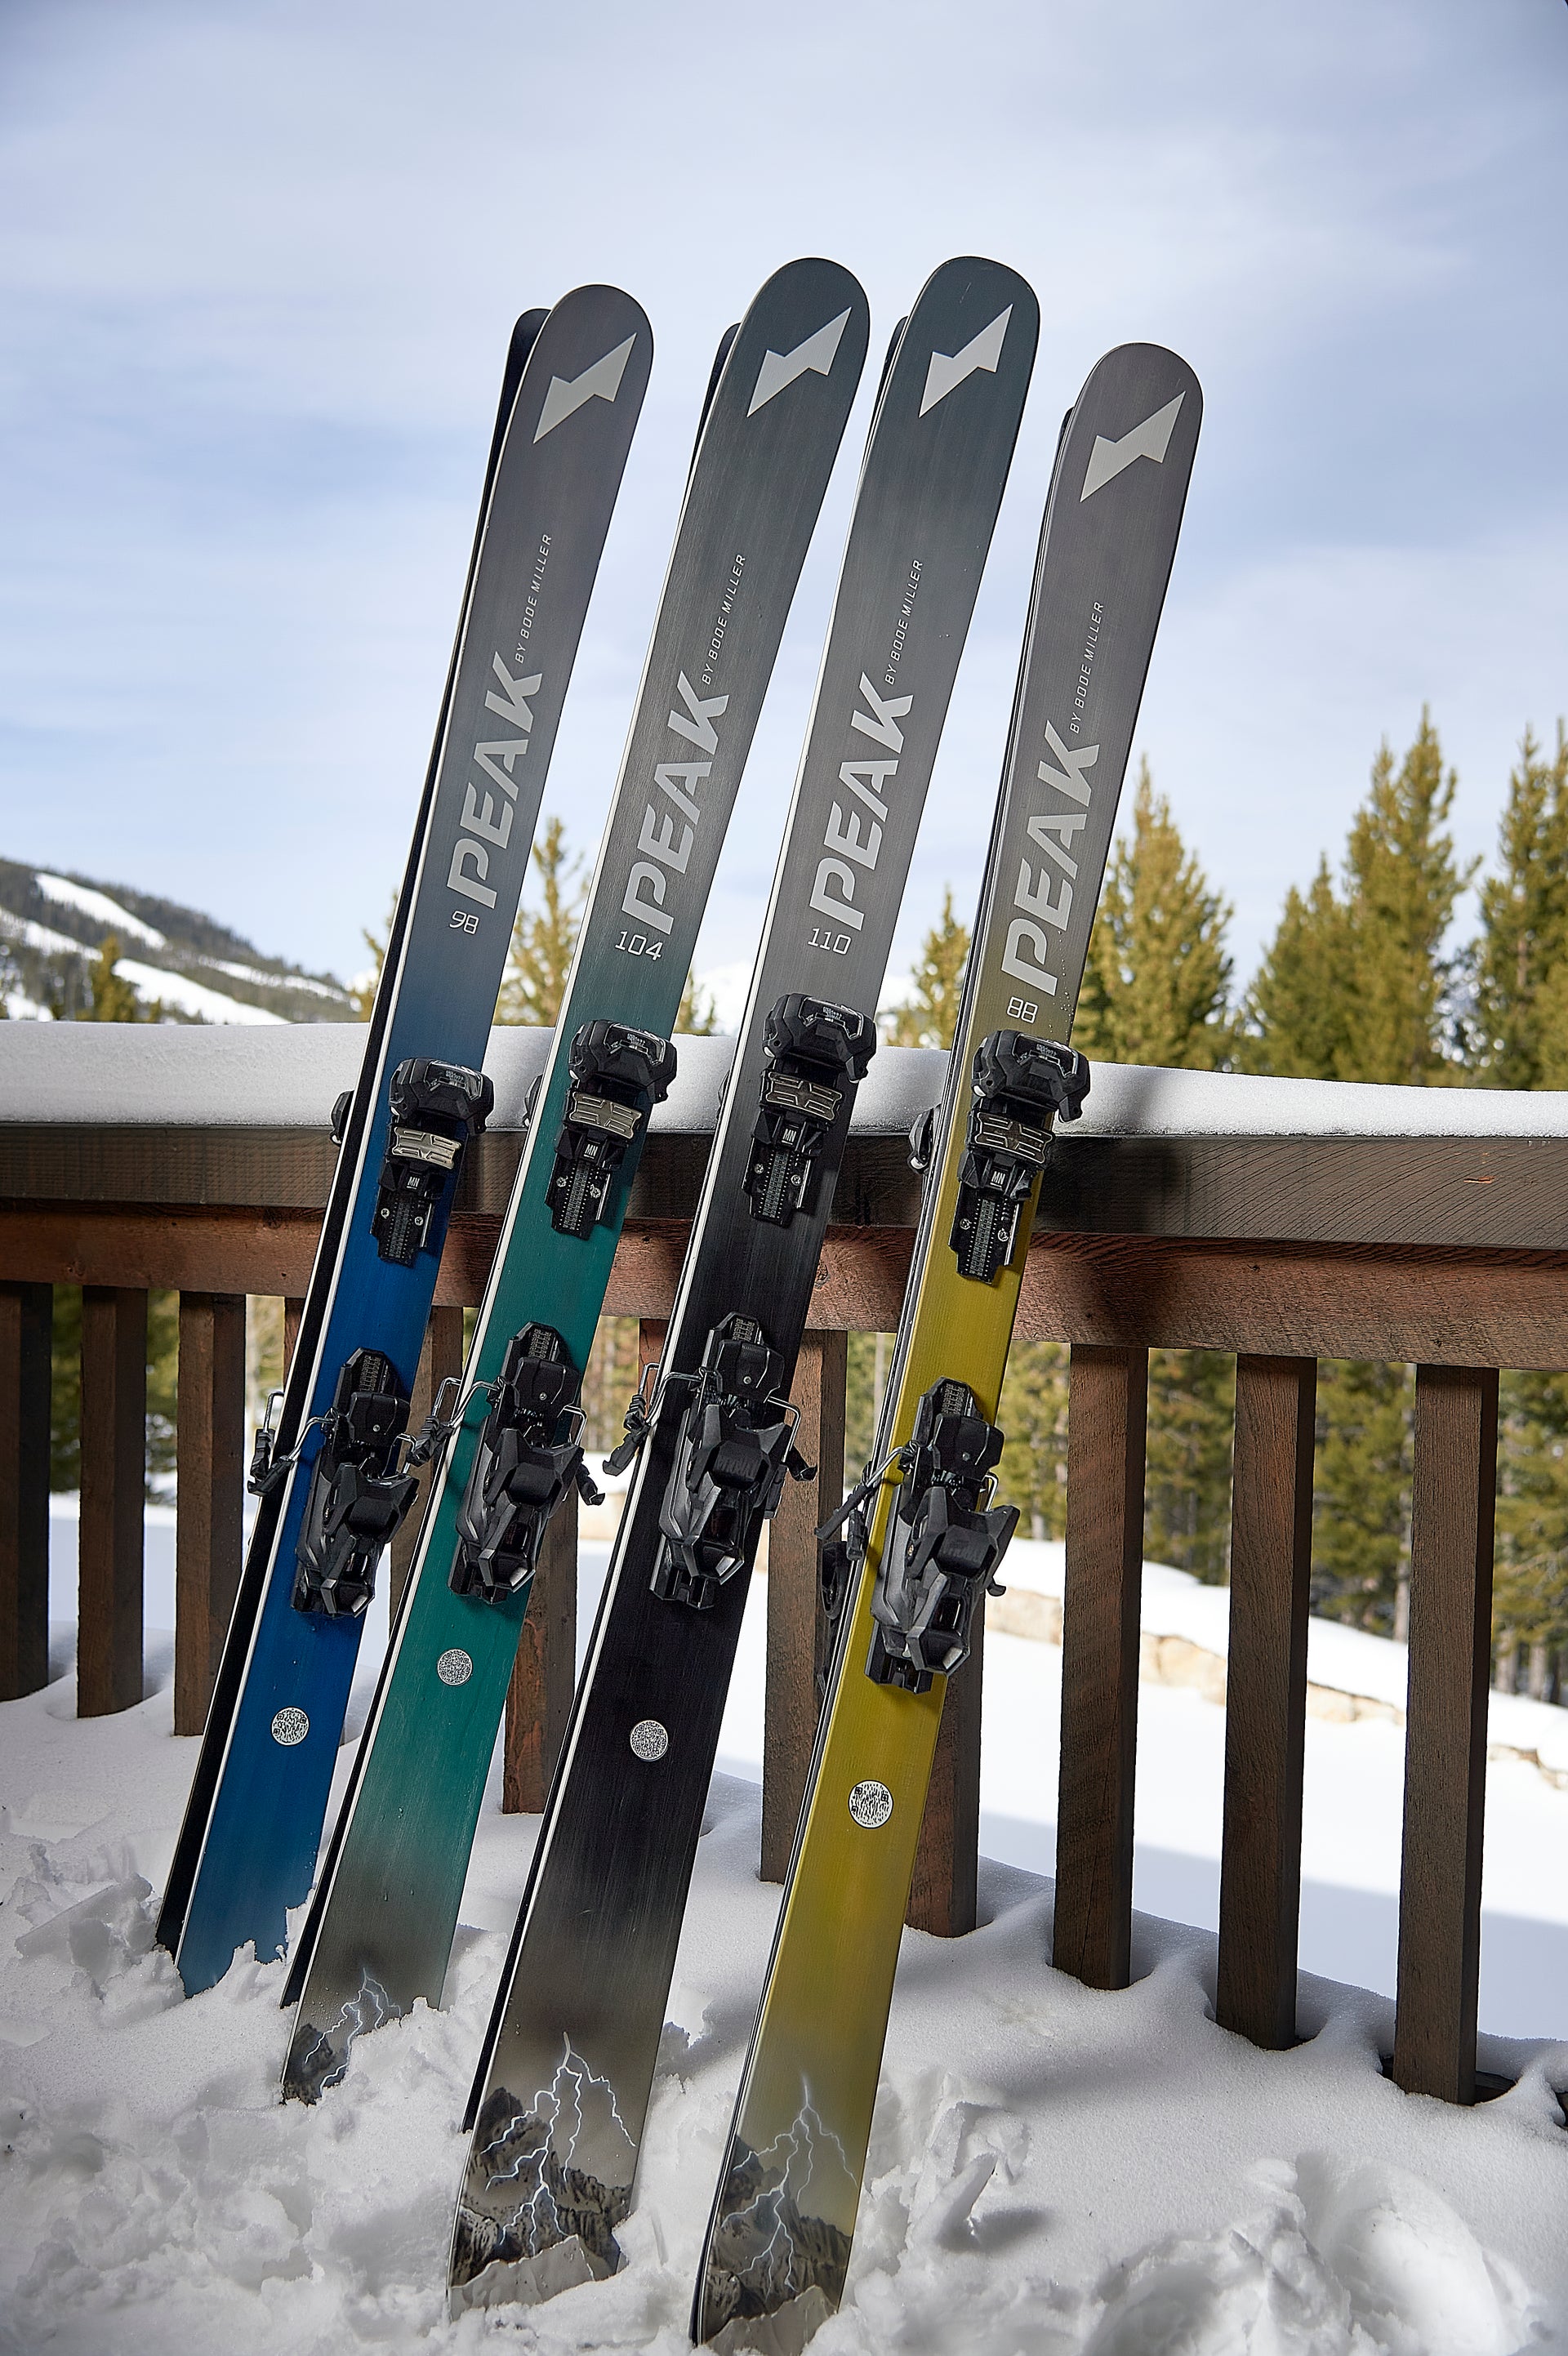 Peak Skis lined up leaning on a rail